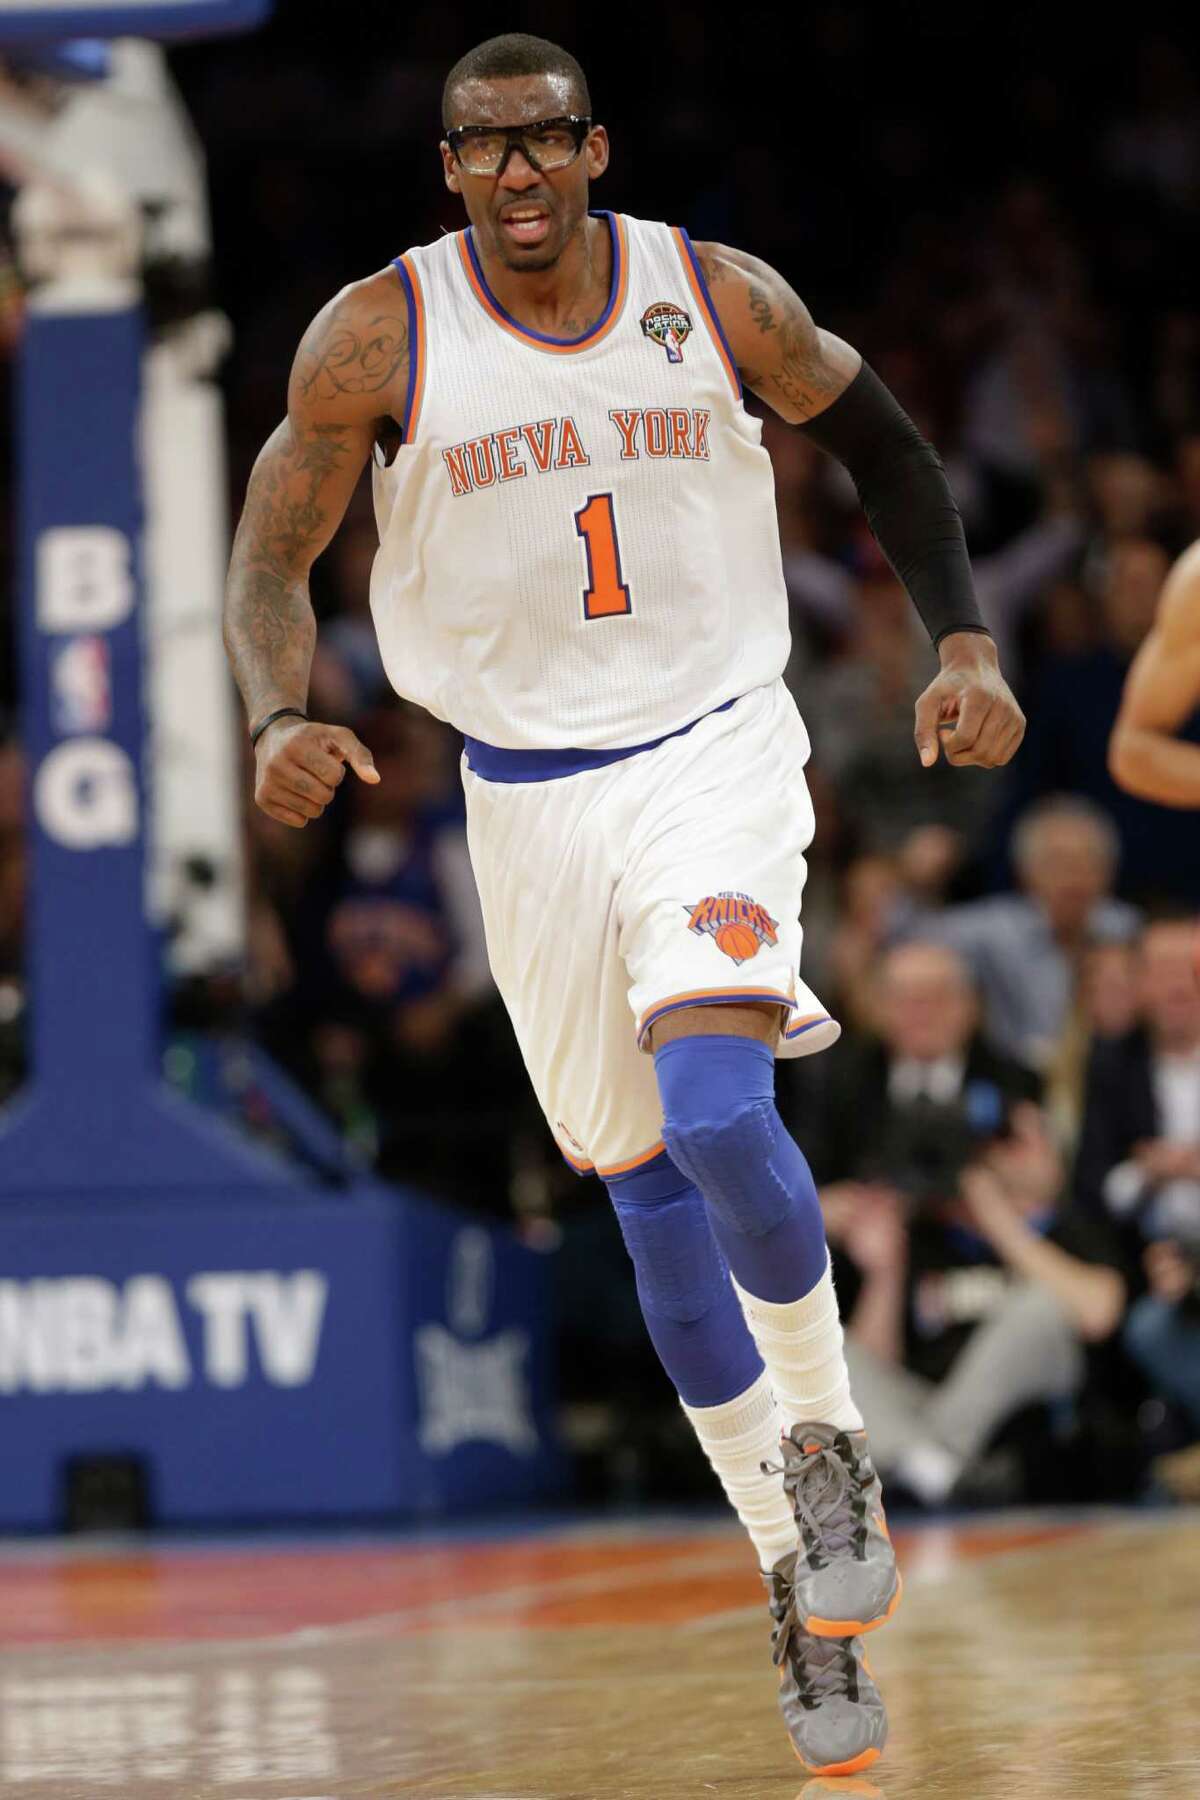 Knicks' Amare Stoudemire Named Second-Team All-NBA - Amar'e Stoudemire